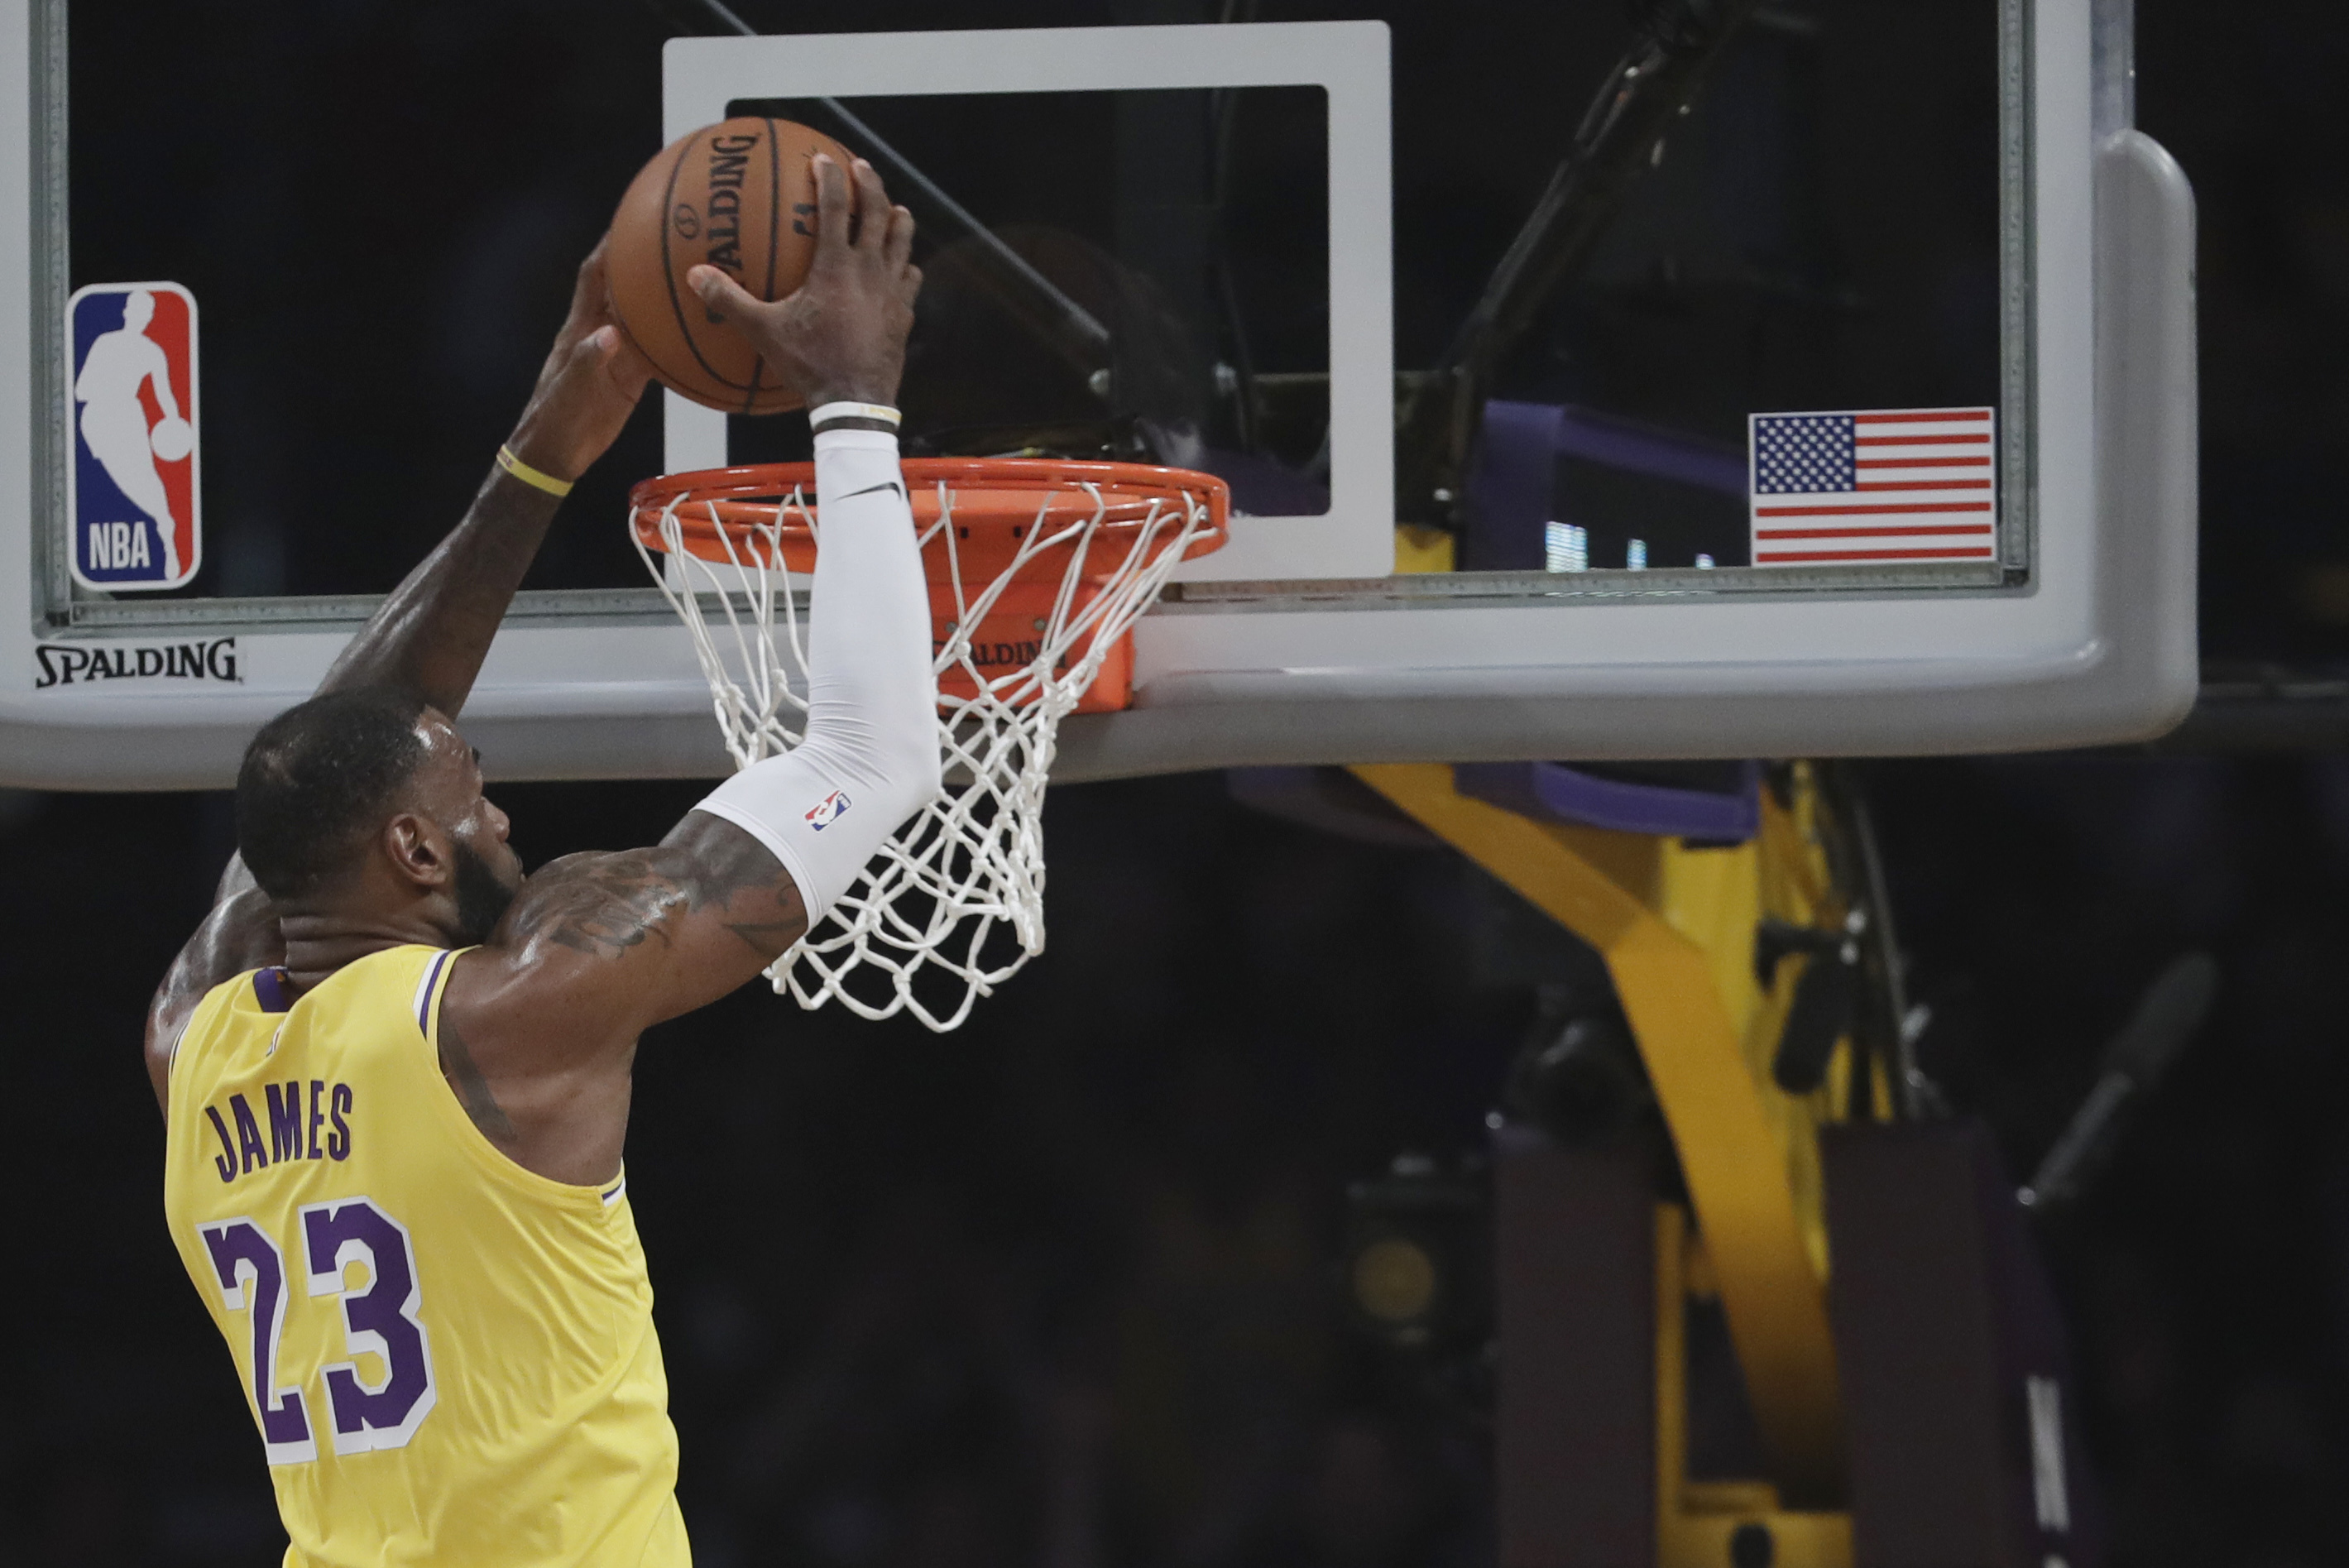  LeBron  James Top Shot  Video of Dunk from Lakers vs 